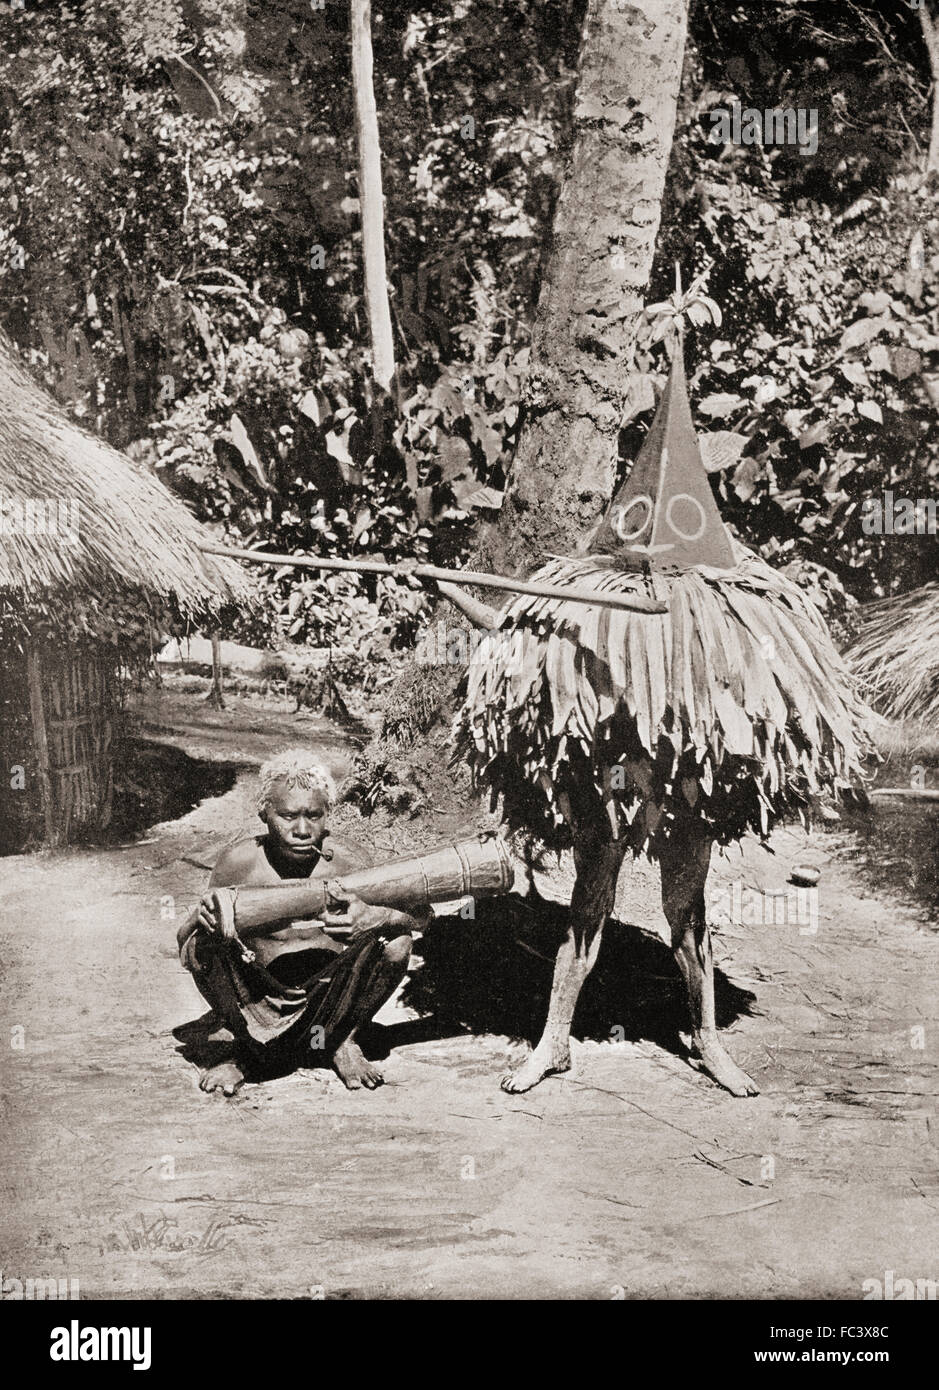 A masked dancer of a Duk-Duk secret society.  The Duk-Duk was embedded in the beliefs of the Tolai peoples in the Rabaul area of New Britain, the largest island in the Bismarck Archipelago of Papua New Guinea.  Only men were allowed to join. From a 19th century photograph. Stock Photo